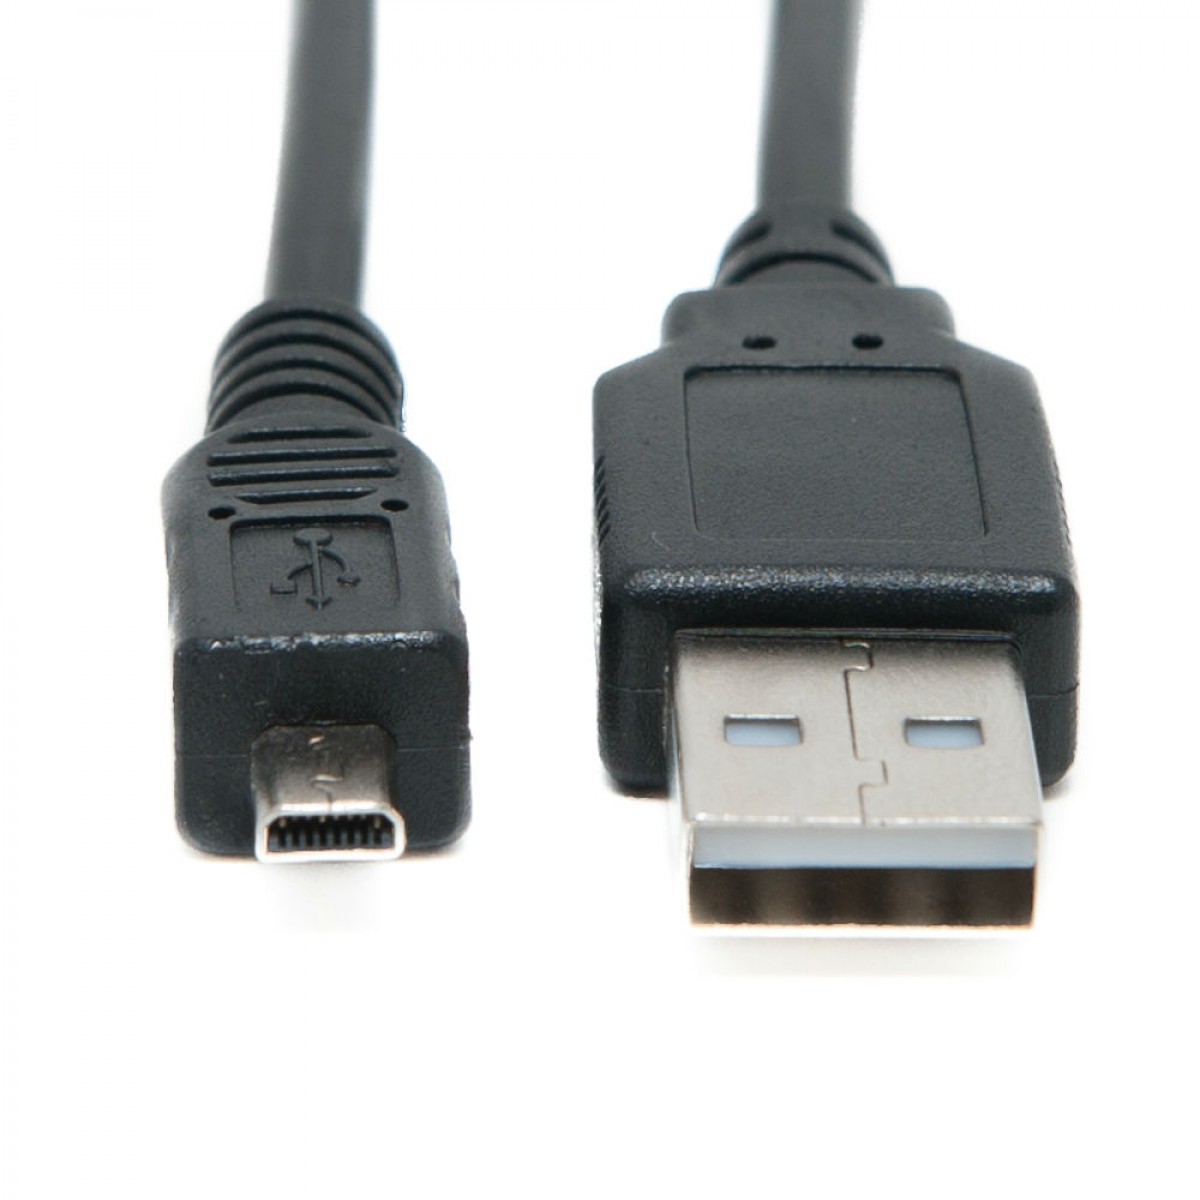 FinePix S2700HD USB Cable - A Perfect Replacement for the Original Fujifilm Digital Camera USB Cable |